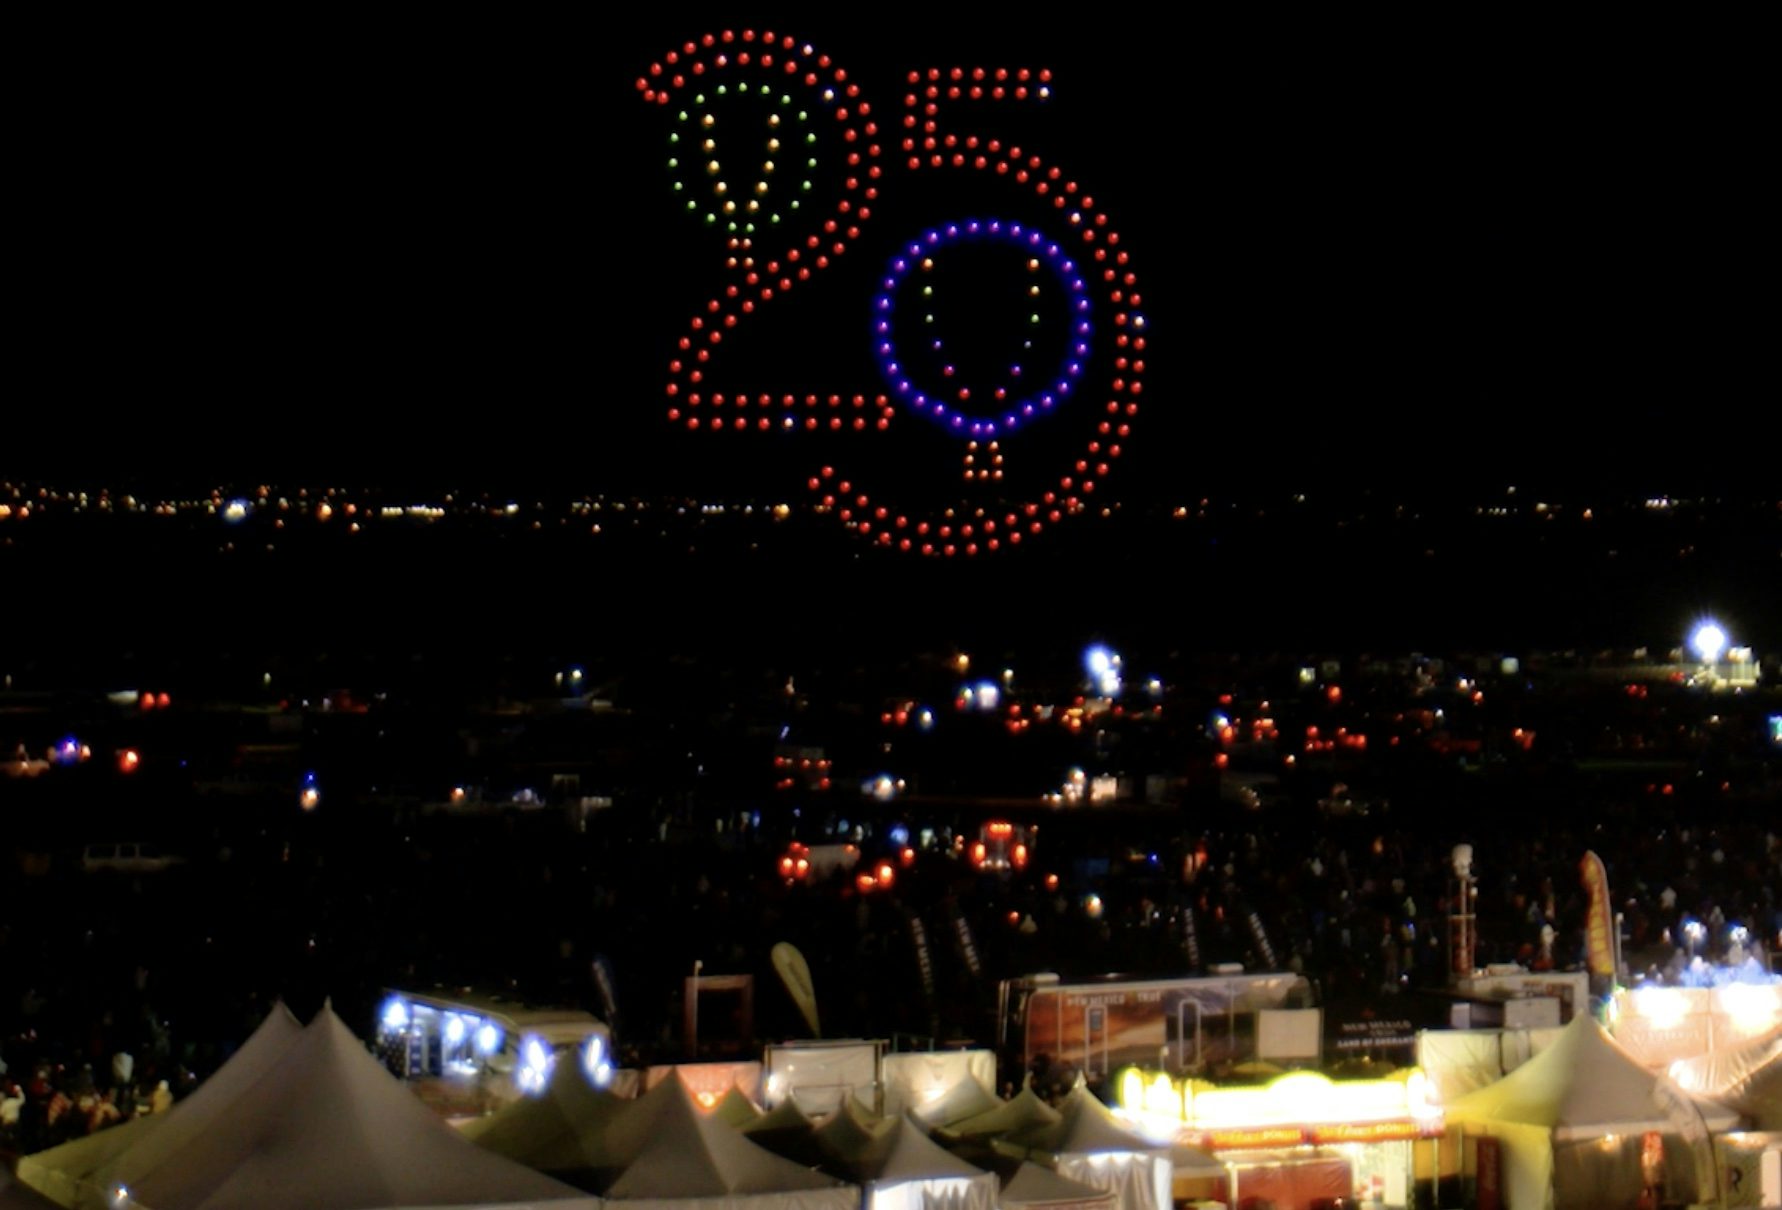 A festival celebrating the earliest form of aviation was complemented by the very latest in aviation technology, when drone show specialist Verge Aero flew a series of spectacular light shows for the 50th anniversary Albuquerque International Balloon Fiesta (AIBF) in New Mexico.